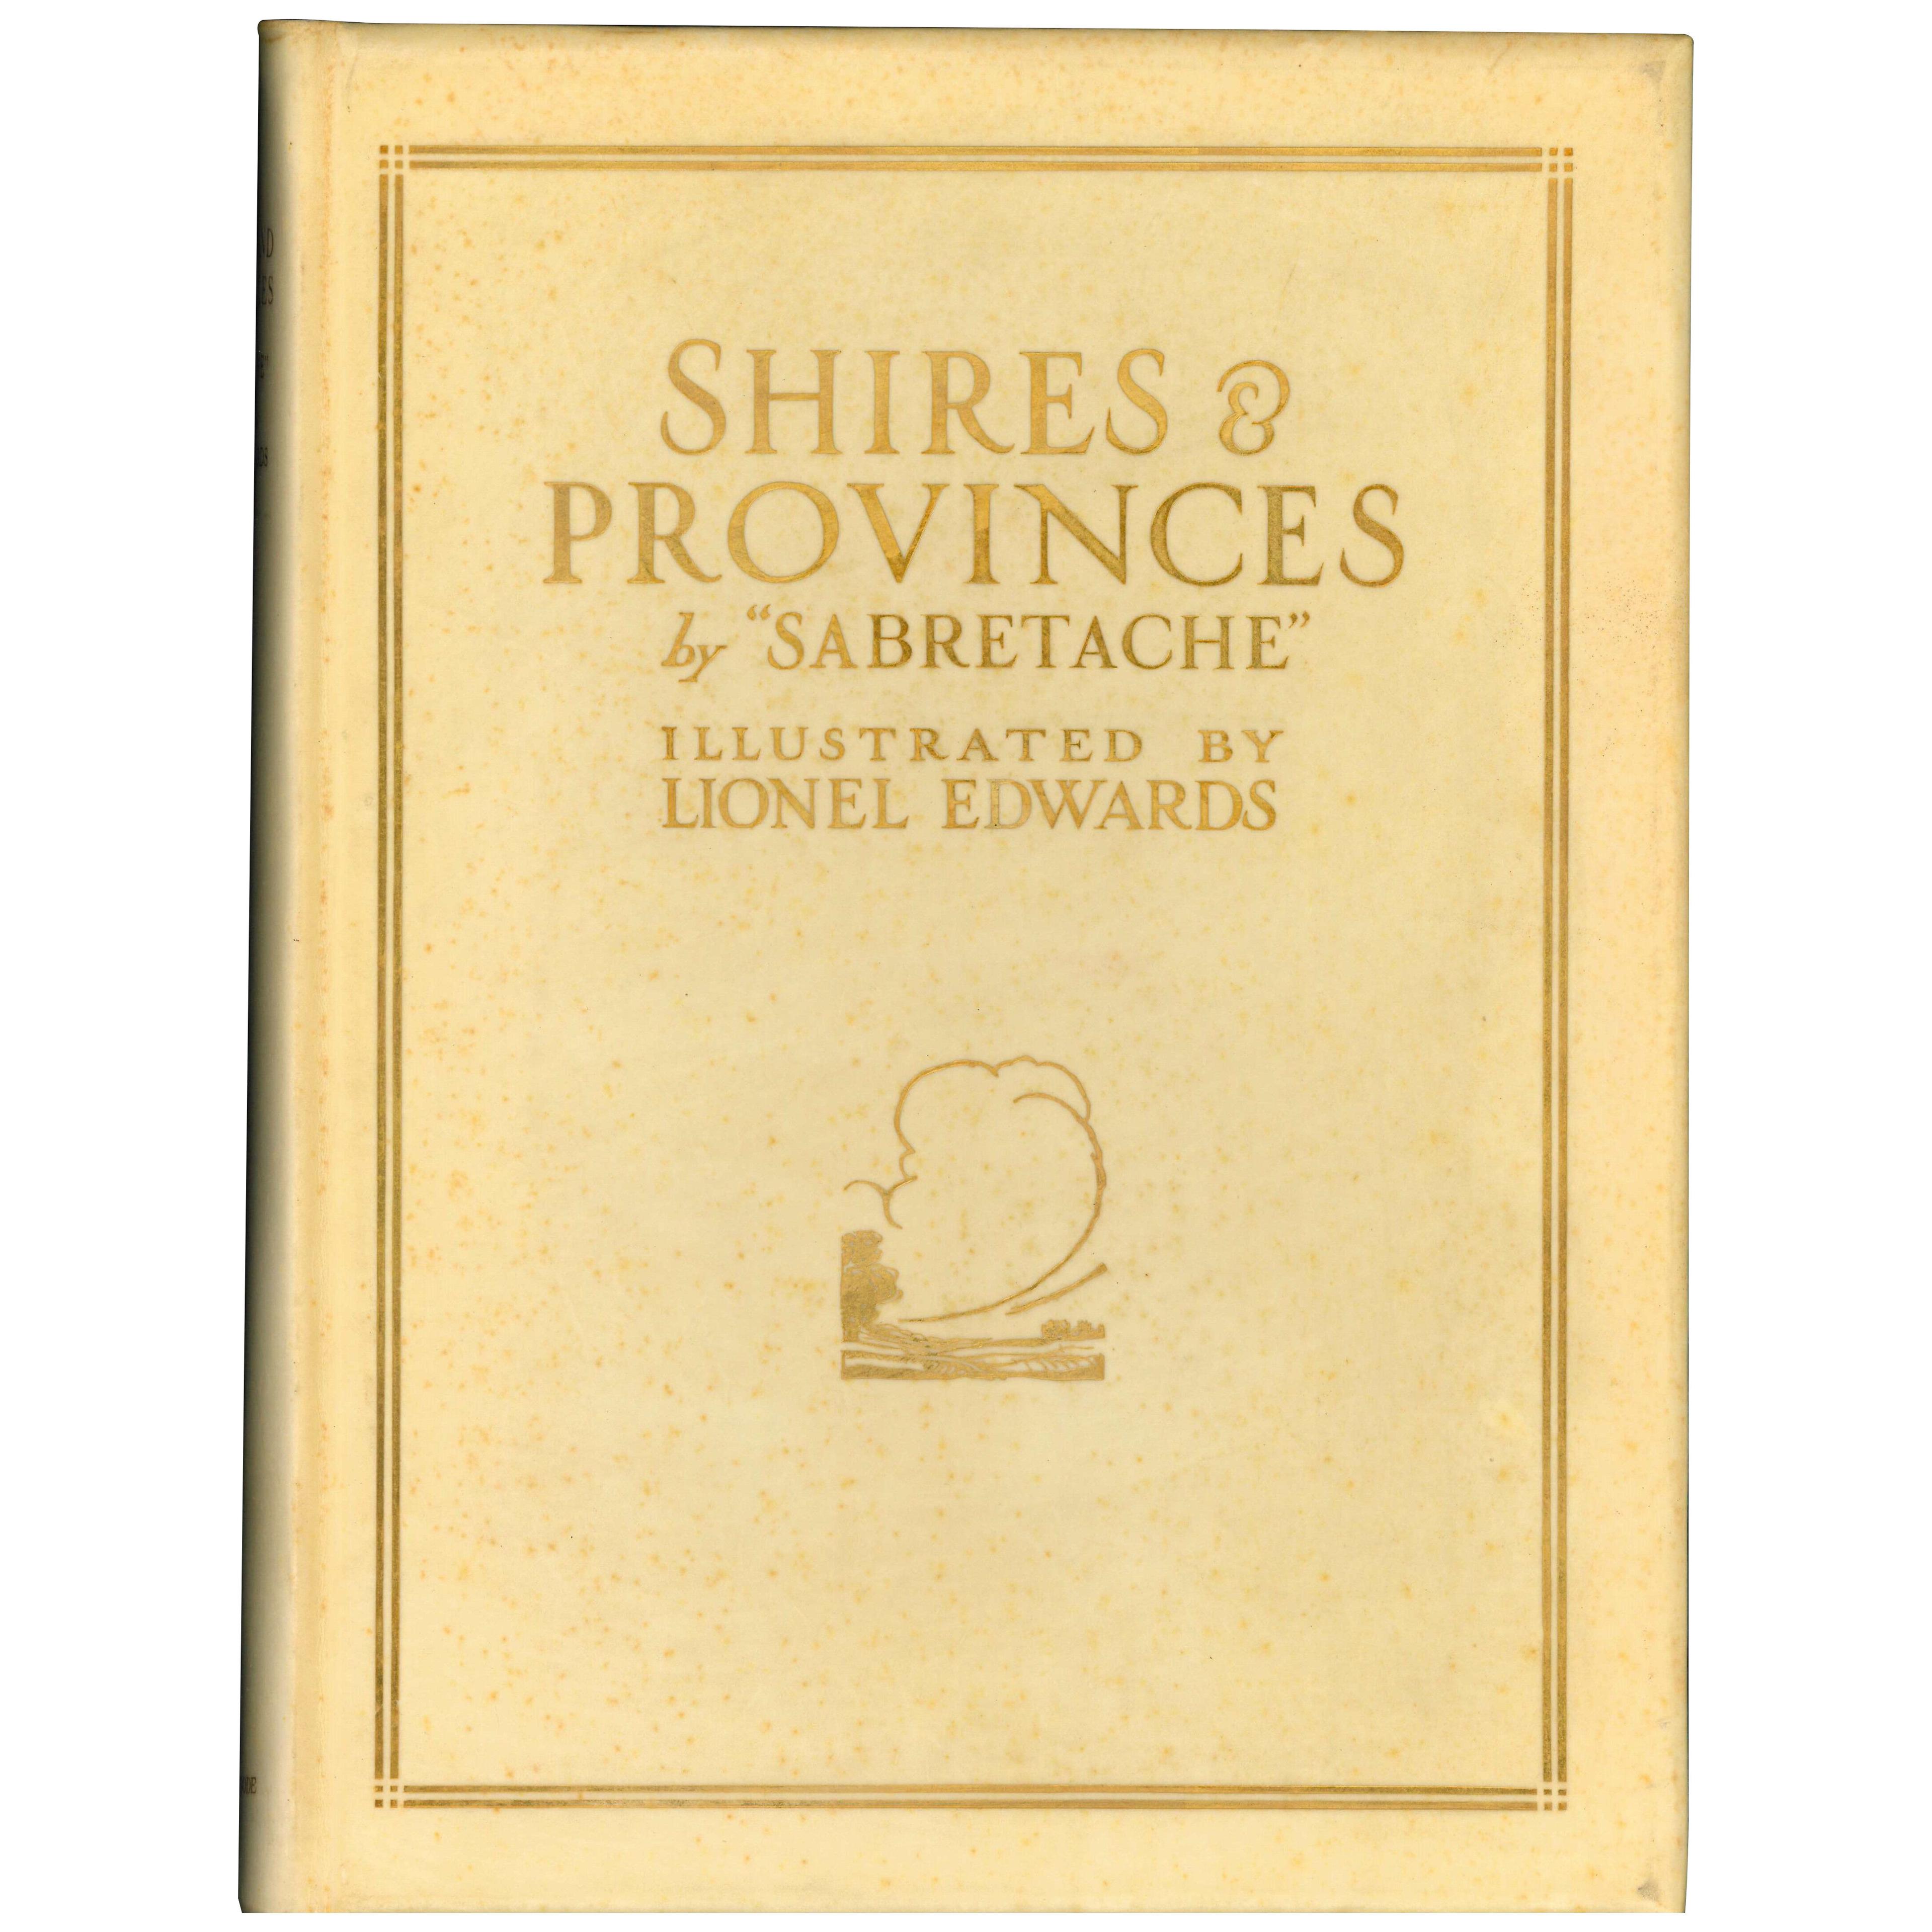 SHIRES AND PROVINCES - Book by Sabretache and Lionel Edwards